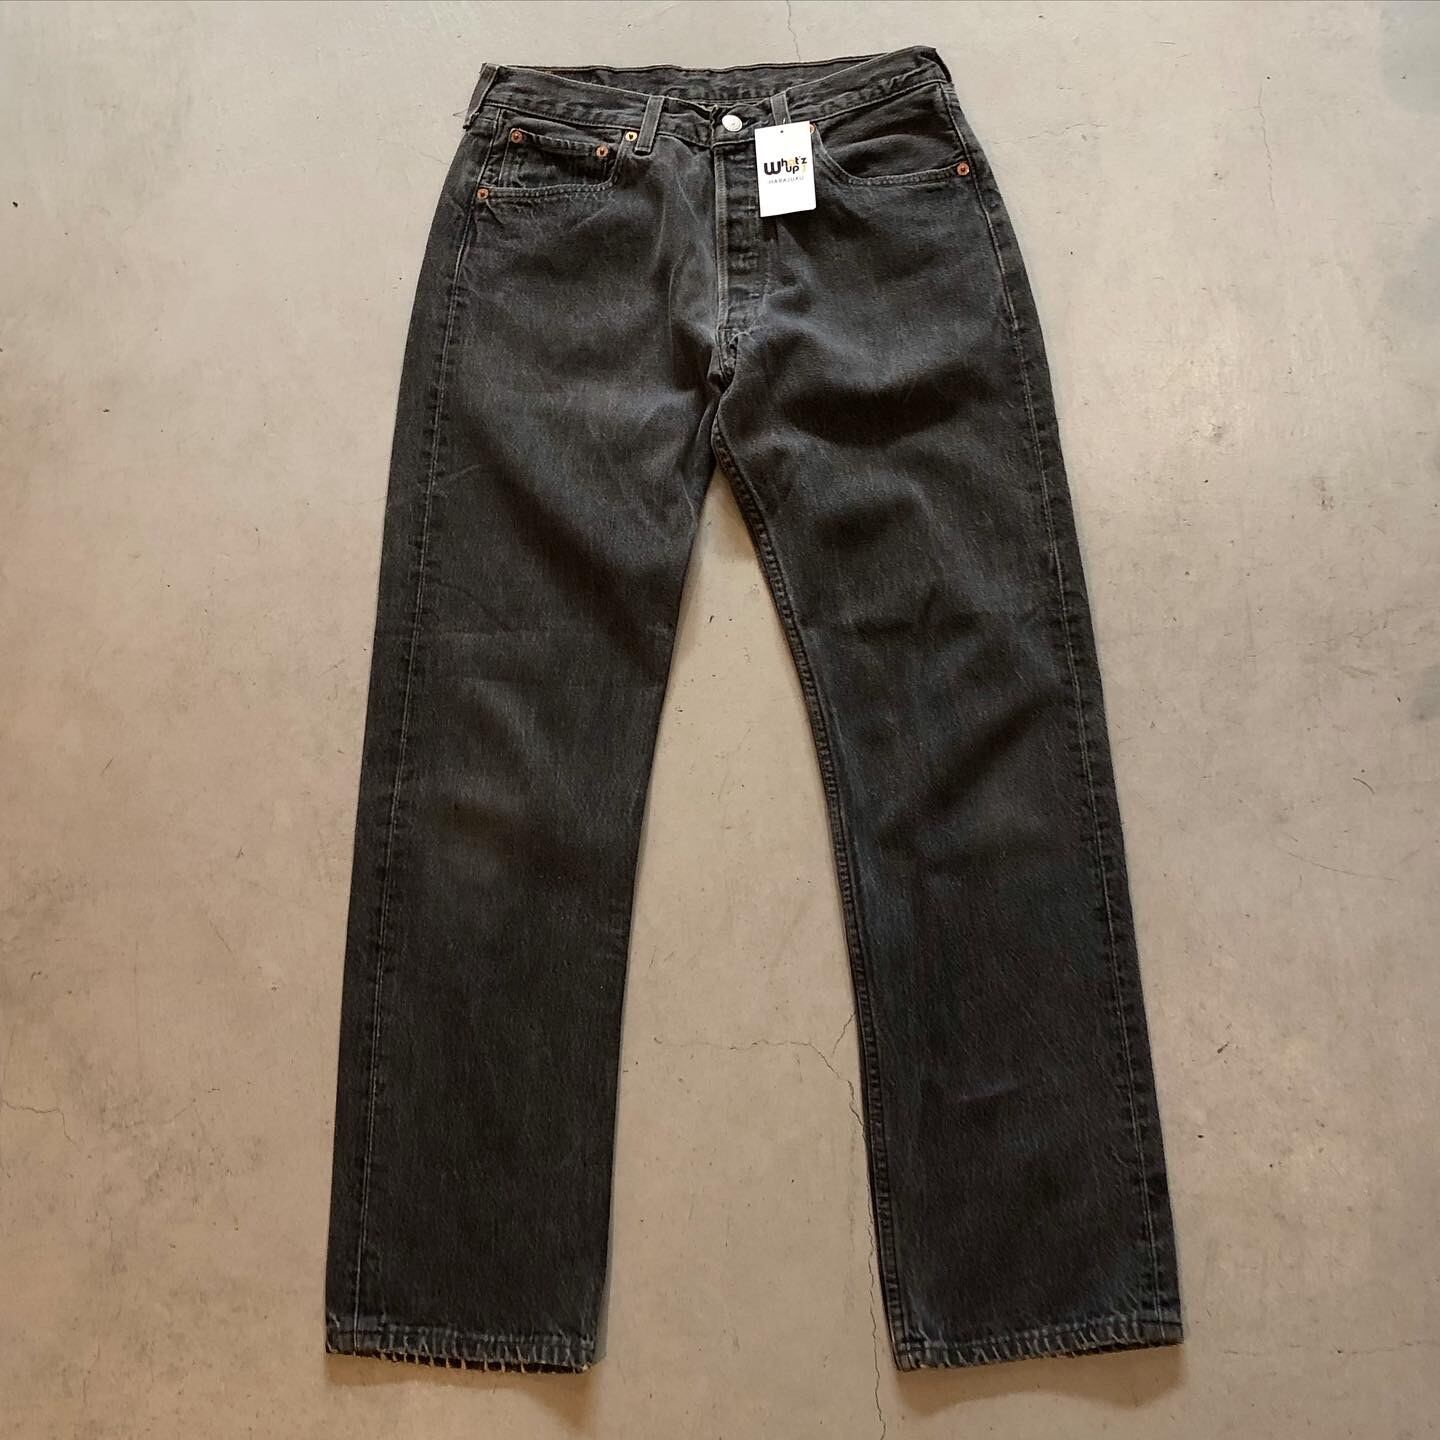 90s Levi's “先染め” 501 black denim pants【高円寺店】 | What’z up powered by BASE